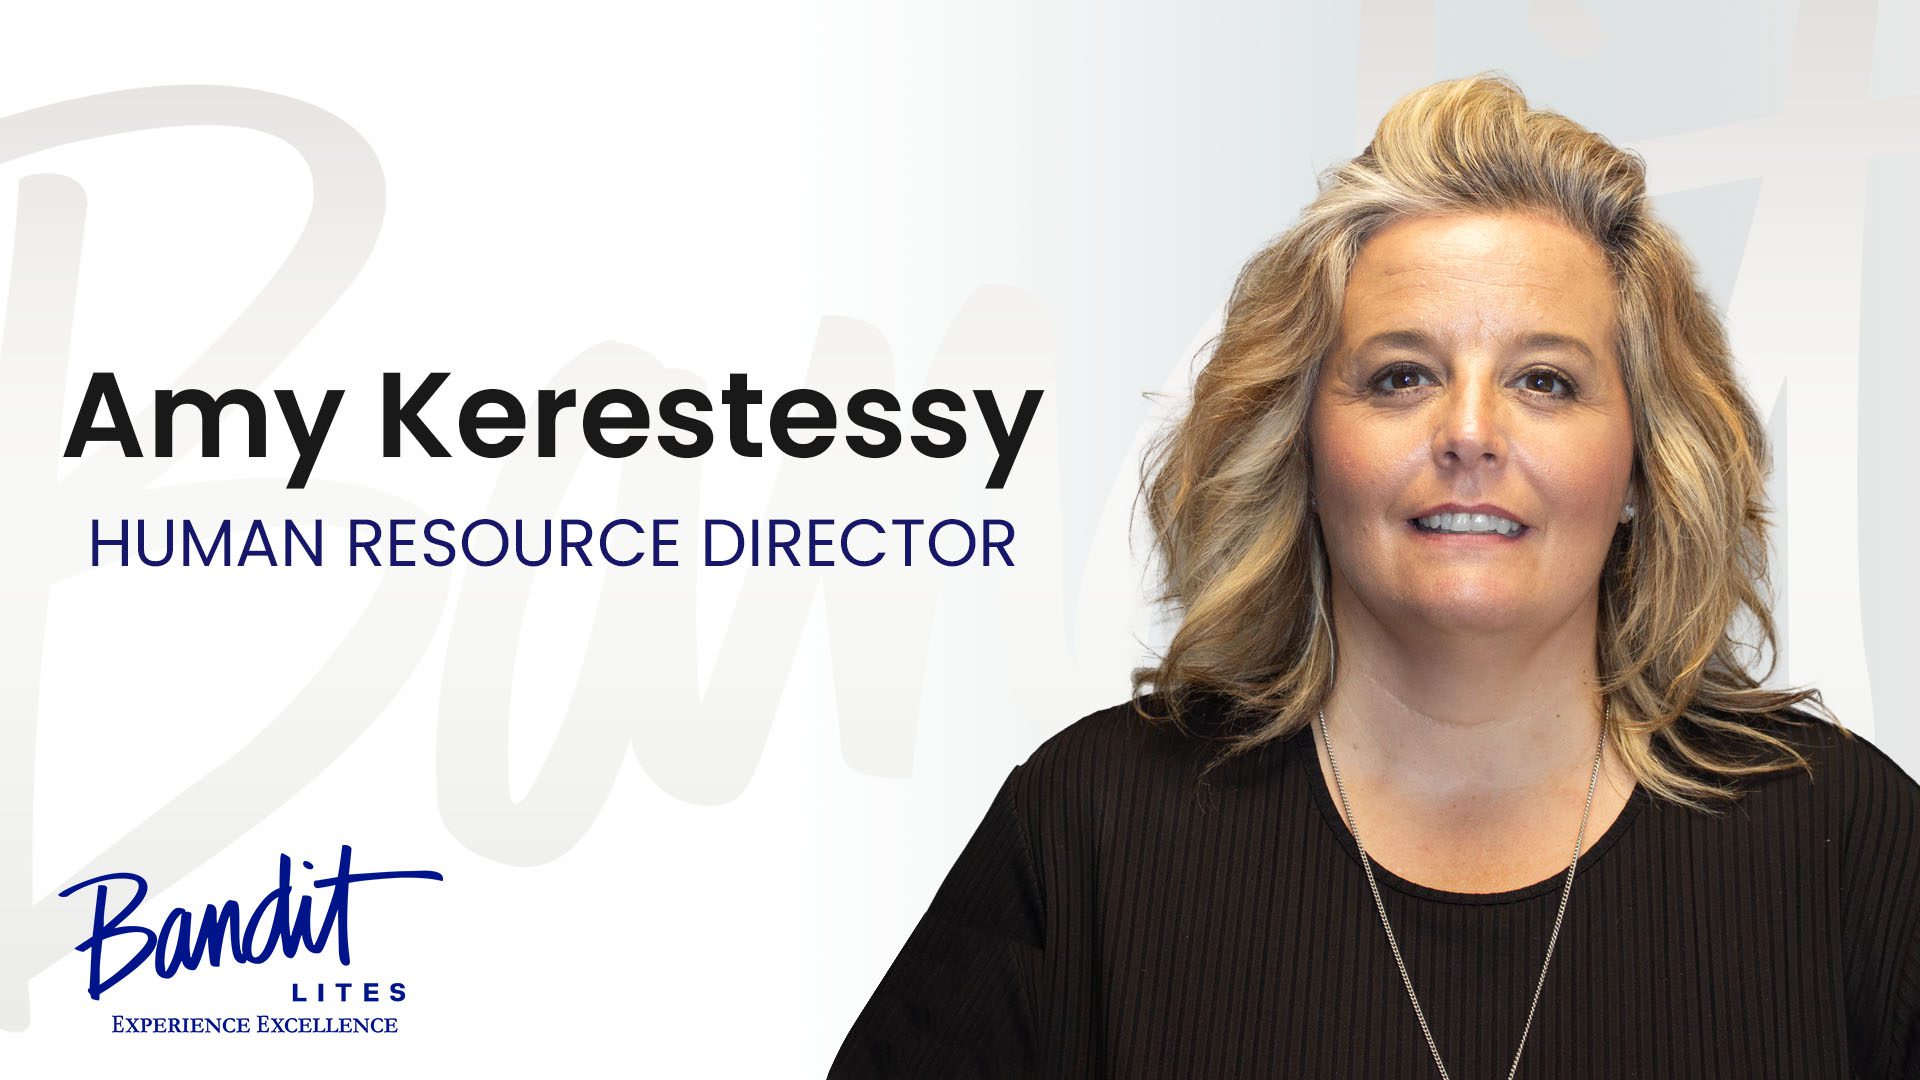 Bandit Lites Hires Amy Kerestessy as Human Resource Director for Knoxville.